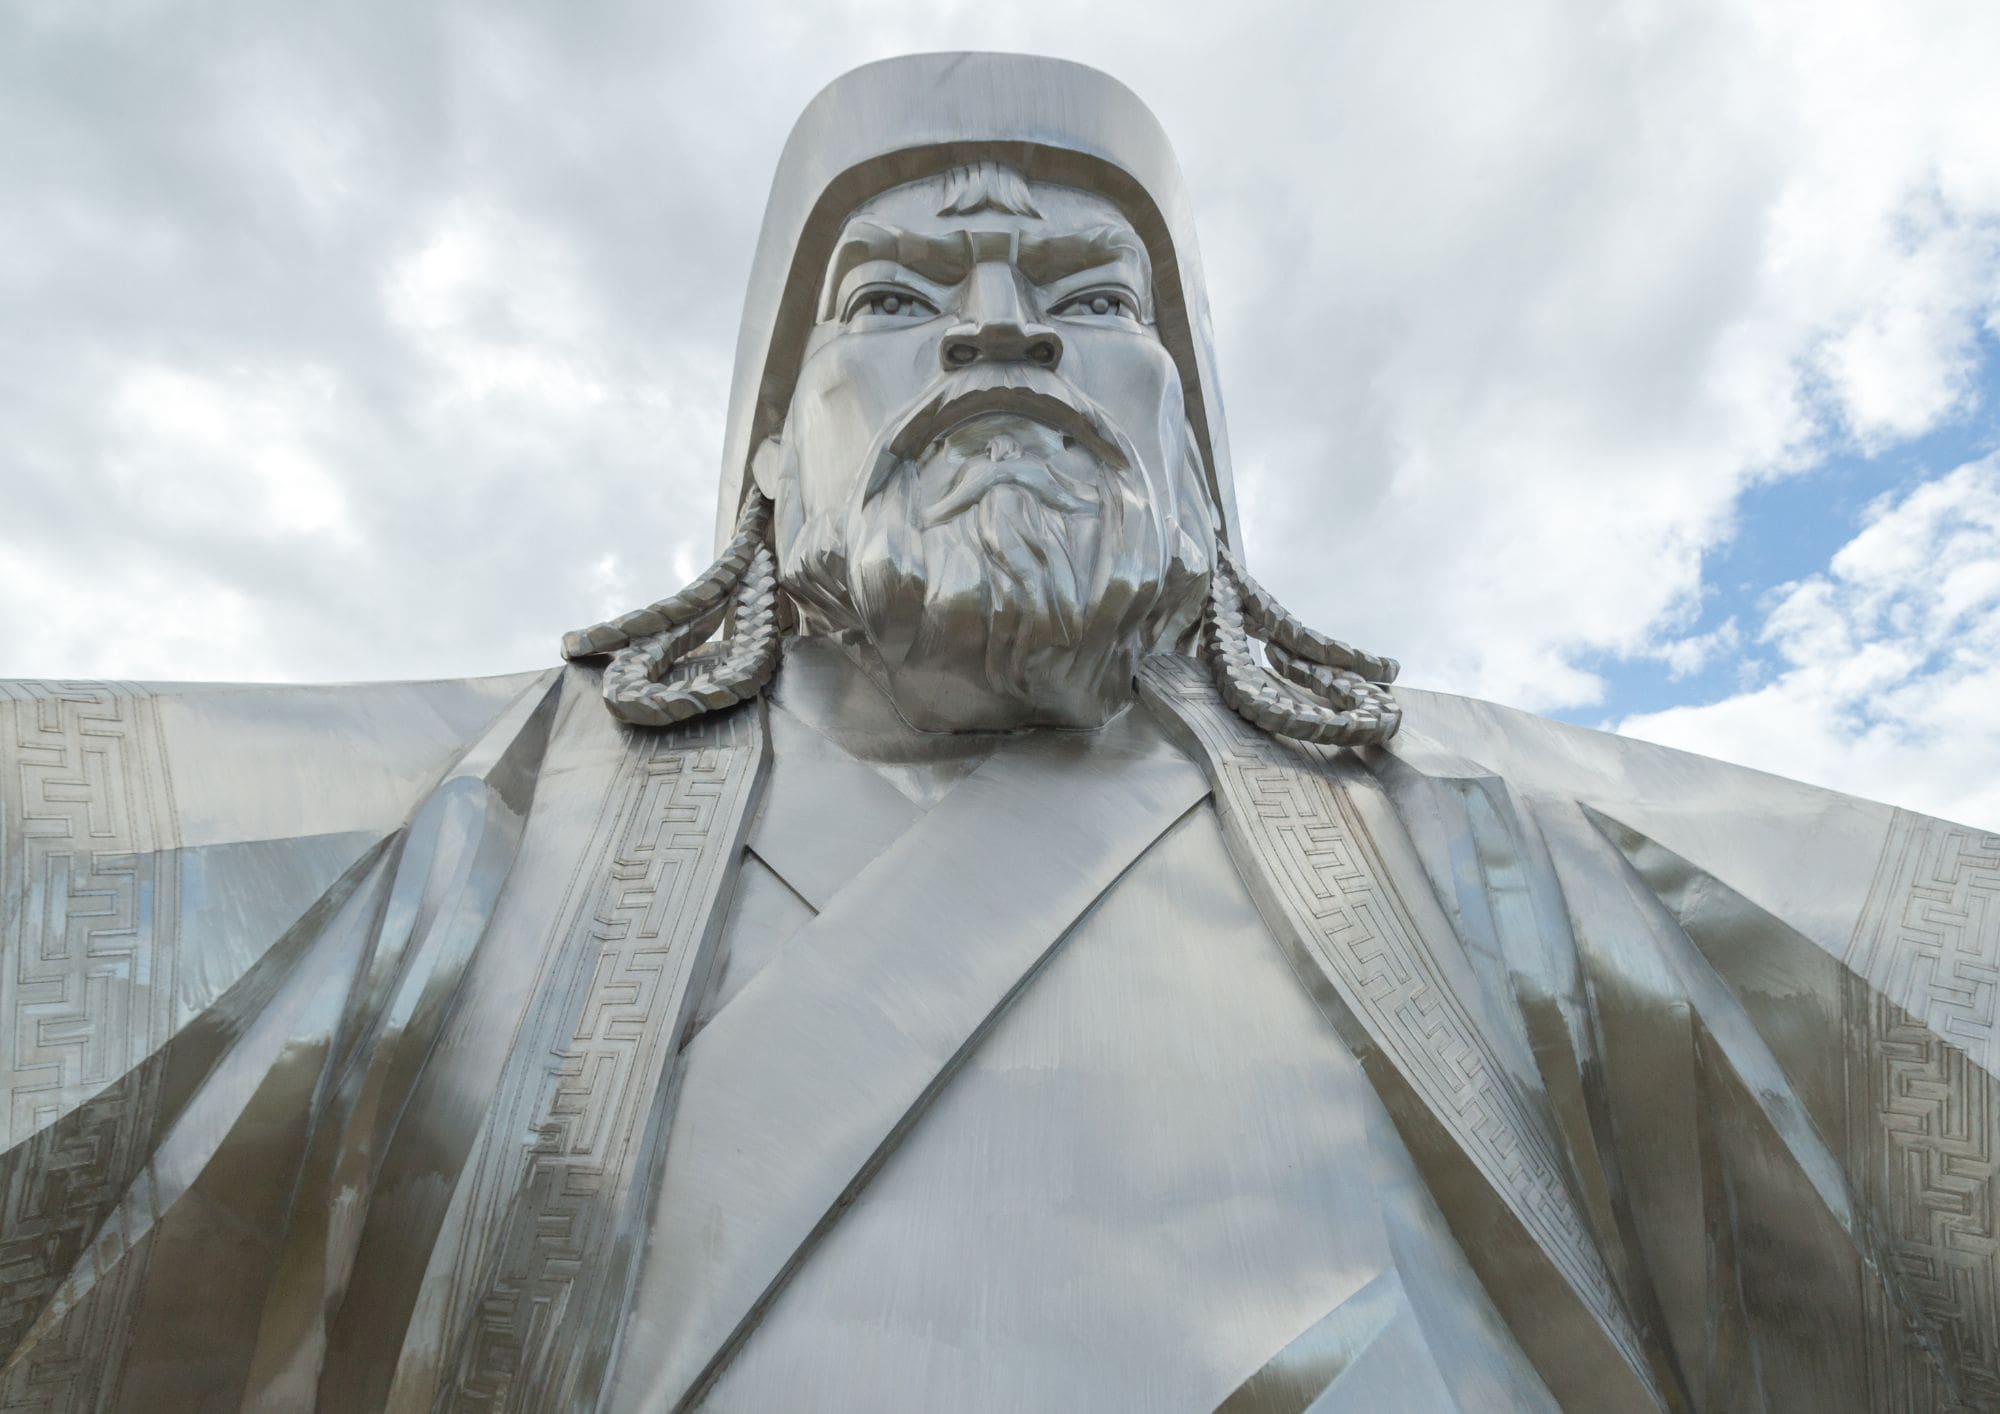 A close-up shot of a silver statue of Genghis Khan.